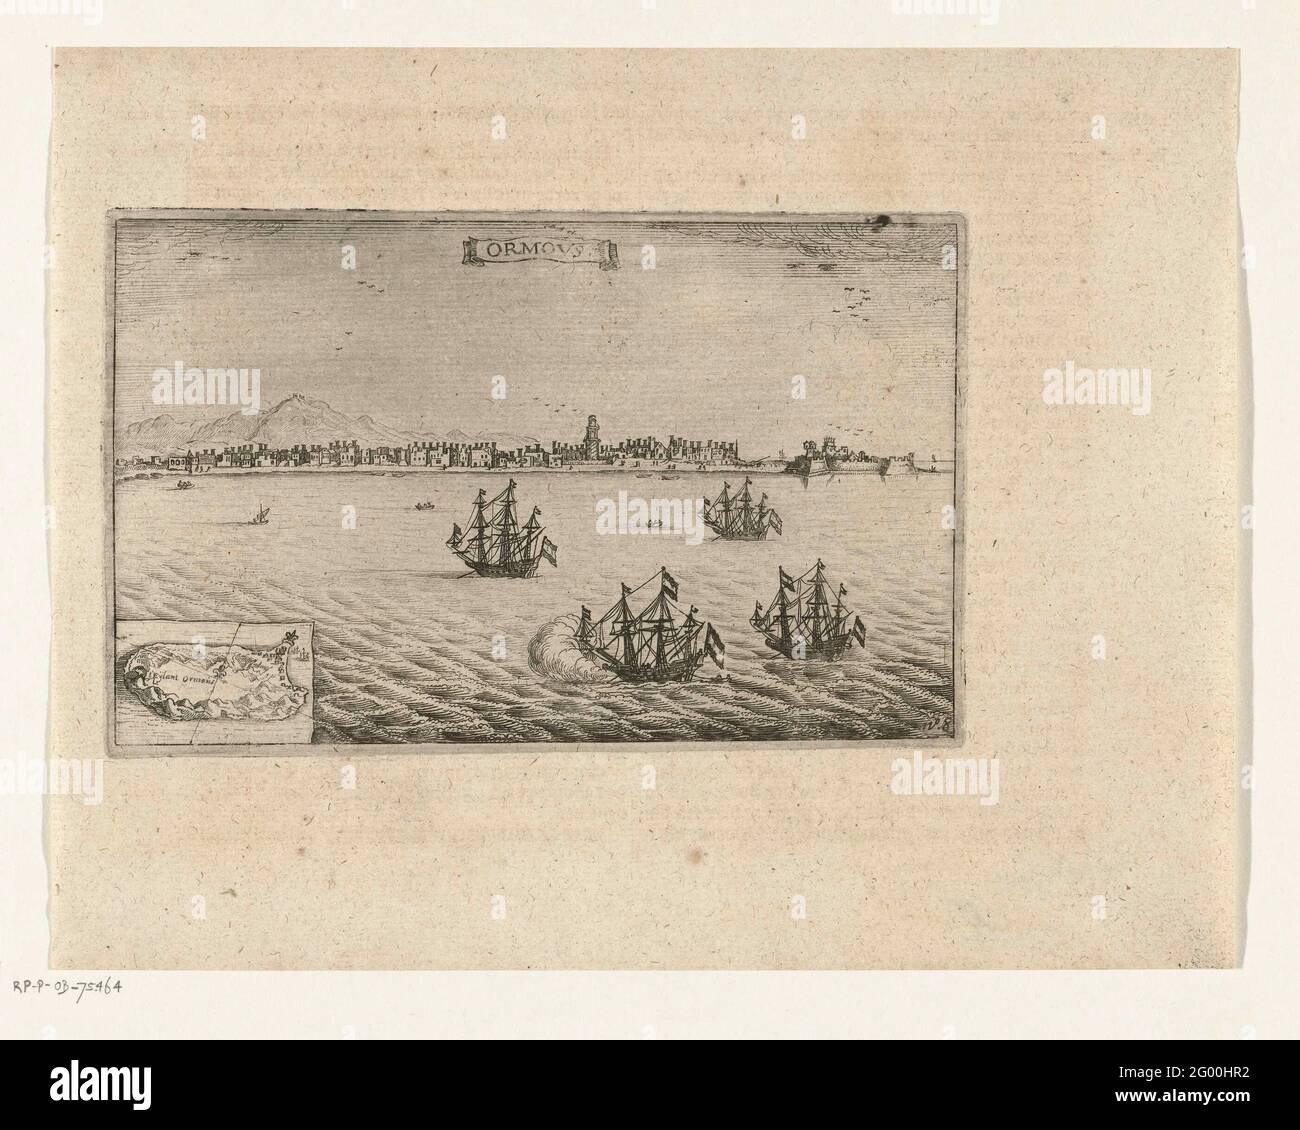 Ships at the island of Hormoz, 1629; Ormous; The Eyland ormous, and Gomeron, at the fixed land of persever. Ships at the island of Hormoz and the city of Gamron (Bandar-e Abbas) on the mainland of Persia, February 1629. At the bottom left of a commitment with a small map of Hormoz island. Part of the illustrations in the report of the tours of Pieter van den Broecke to East Indies, 1605-1640, no. 8. Stock Photo